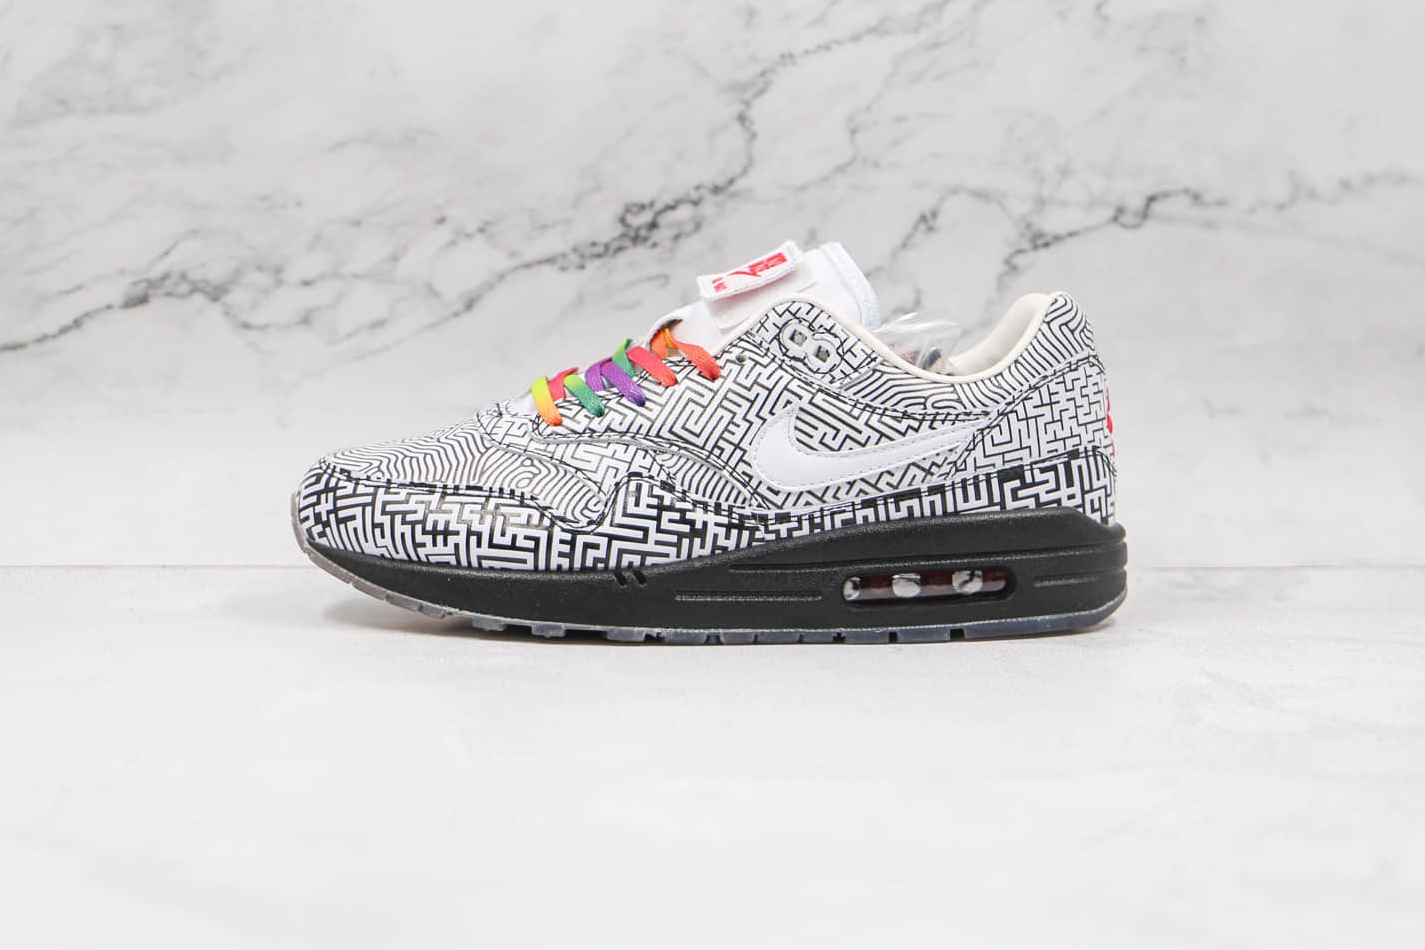 Nike Air Max 1 'On Air Tokyo Maze' CI1505-001 - Limited Edition Sneakers for Sale